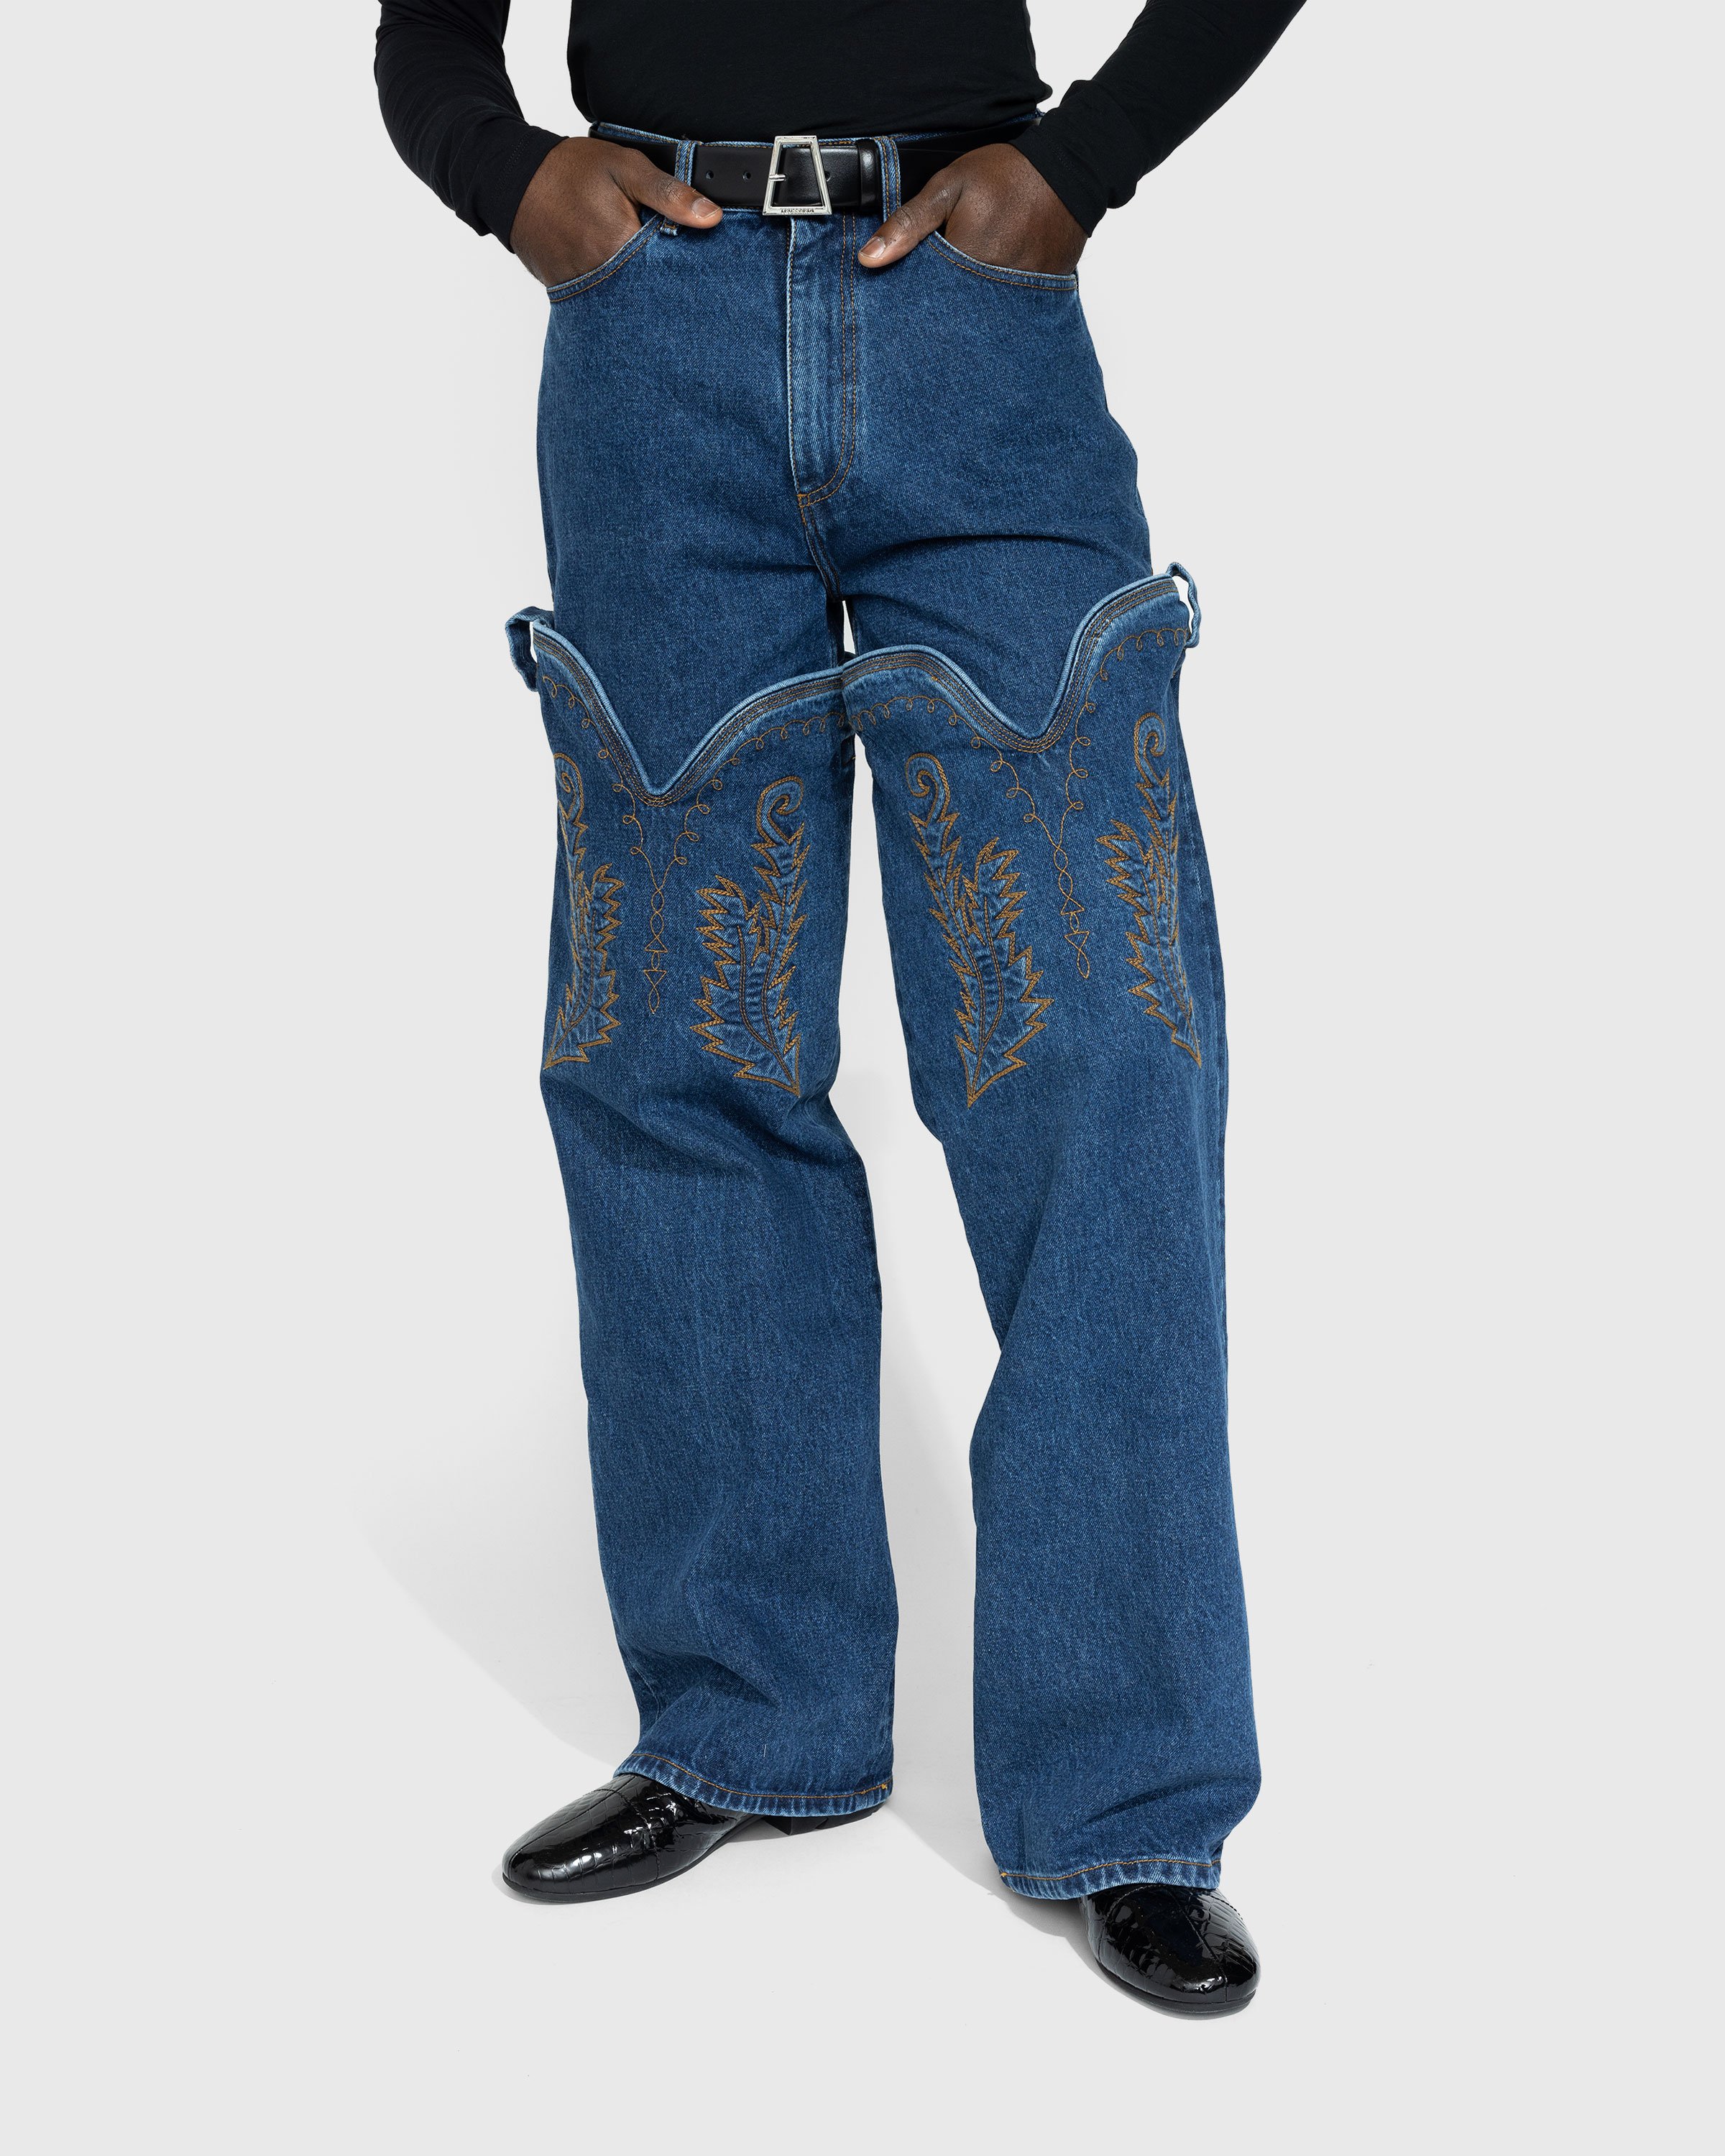 Y/Project - Classic Maxi Cowboy Cuff Jeans Navy - Clothing - Blue - Image 3